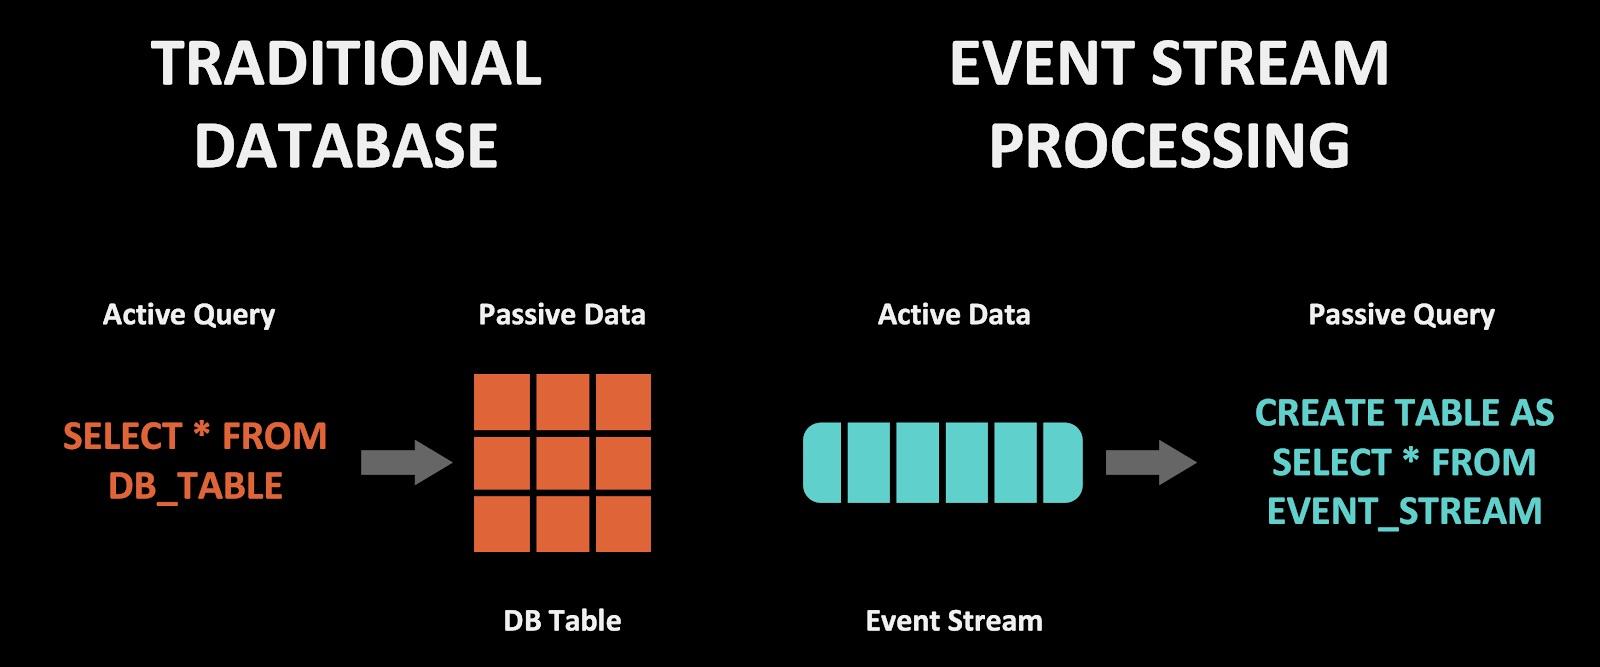 Traditional Database vs Event Stream Processing